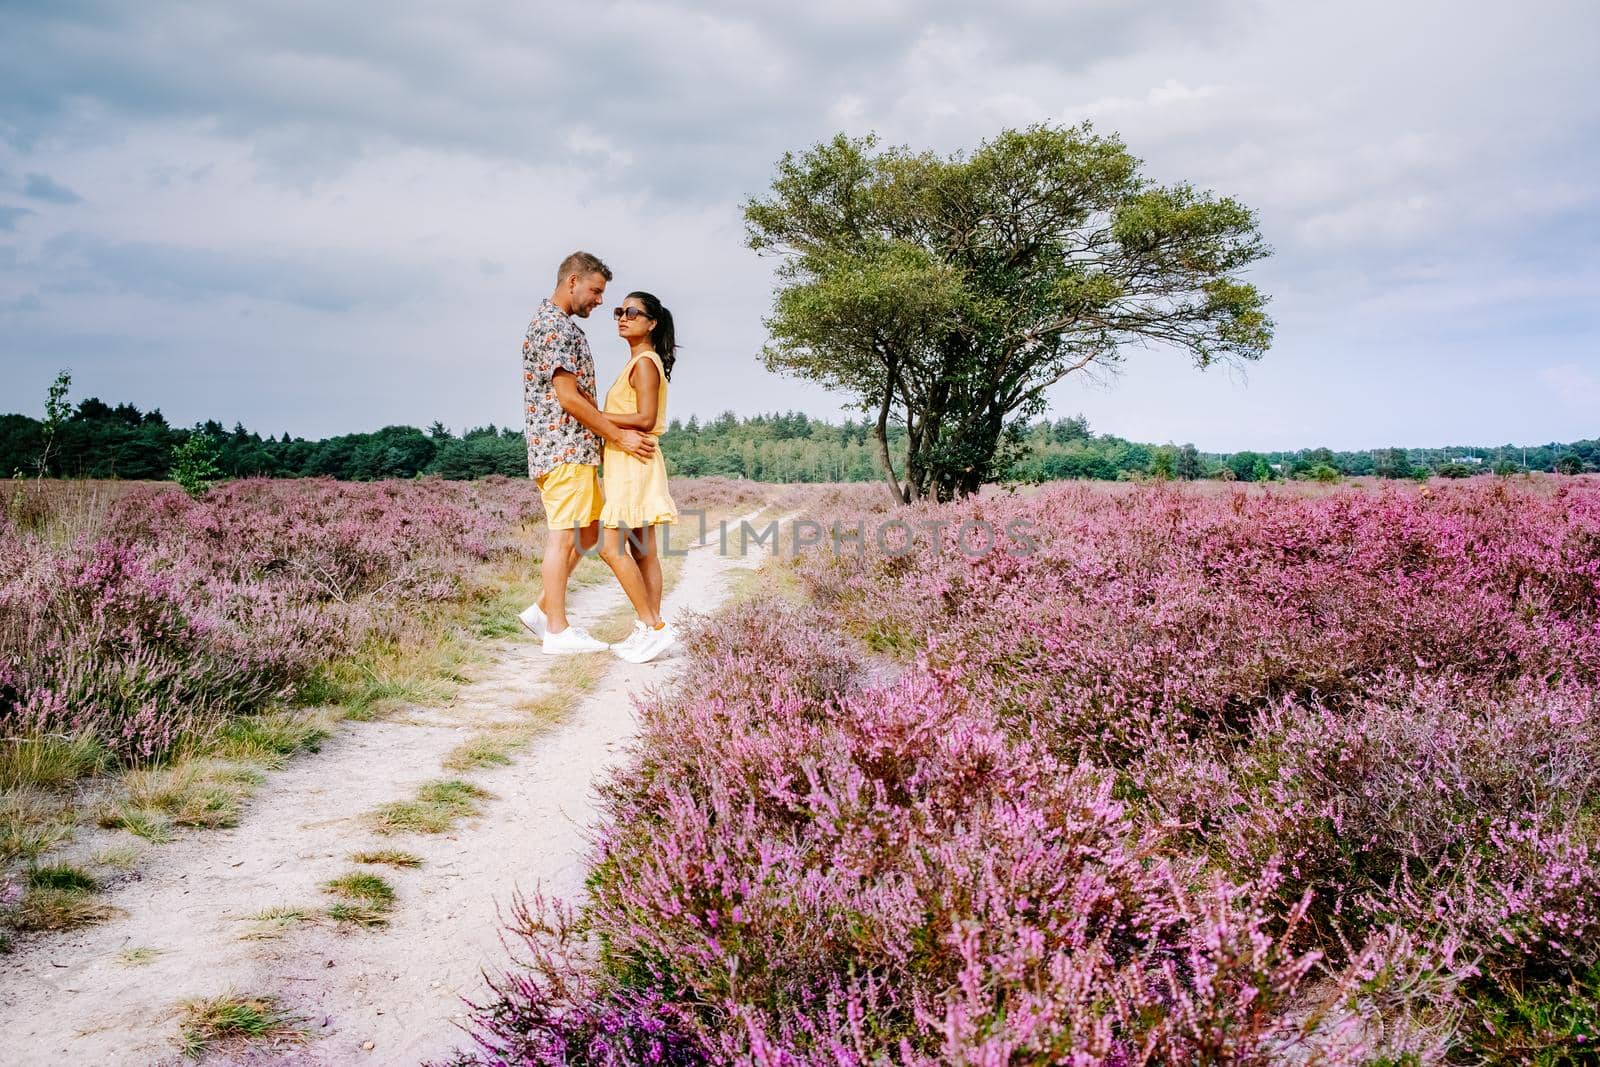 Blooming heather field in the Netherlands near Hilversum Veluwe Zuiderheide, blooming pink purple heather fields in the morniong with mist and fog during sunrise Netherlands Europe